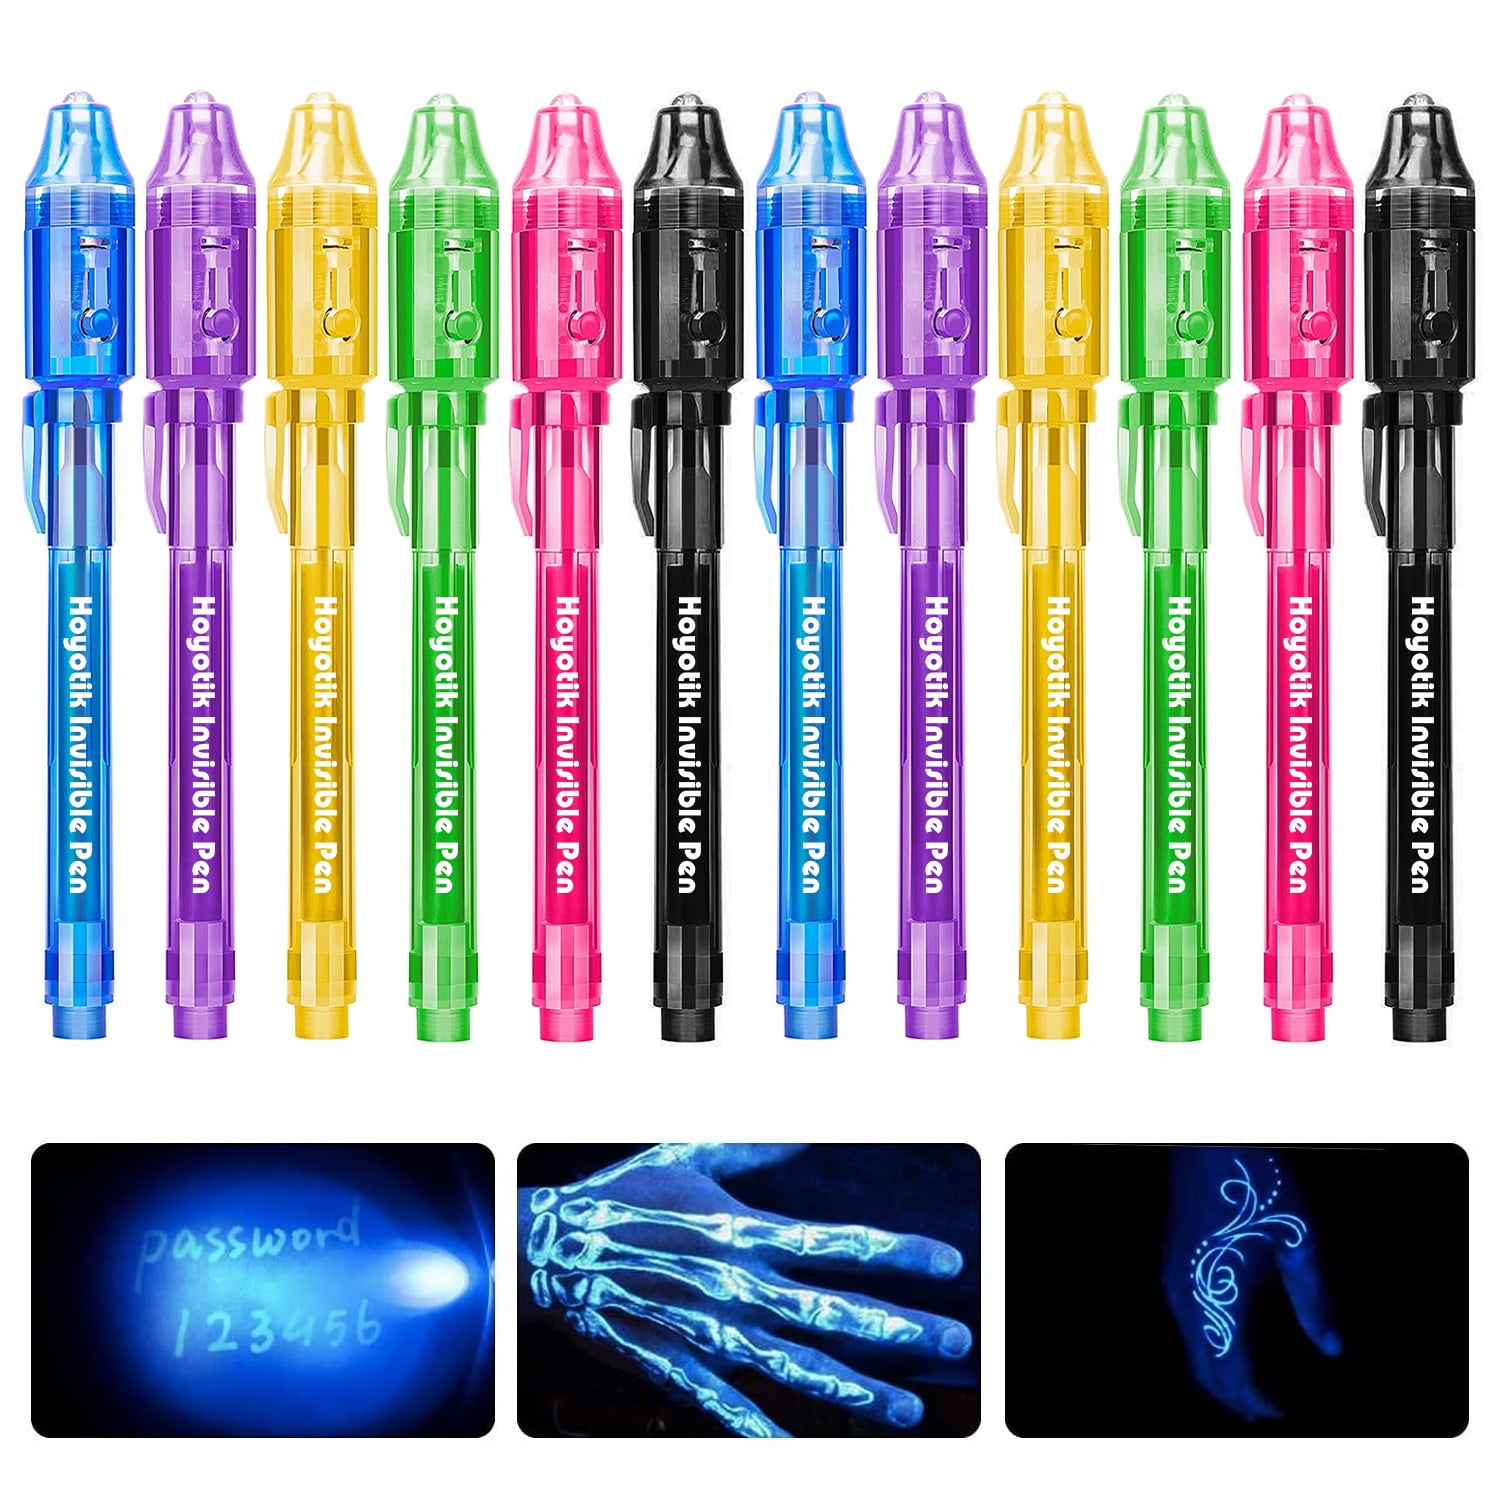 Jandel 5 Pack Invisible Ink Pen, Upgraded Spy Pen Invisible Ink Pen with UV Light Magic Marker for Secret Message and Kids Halloween Goodies Bags Toy(